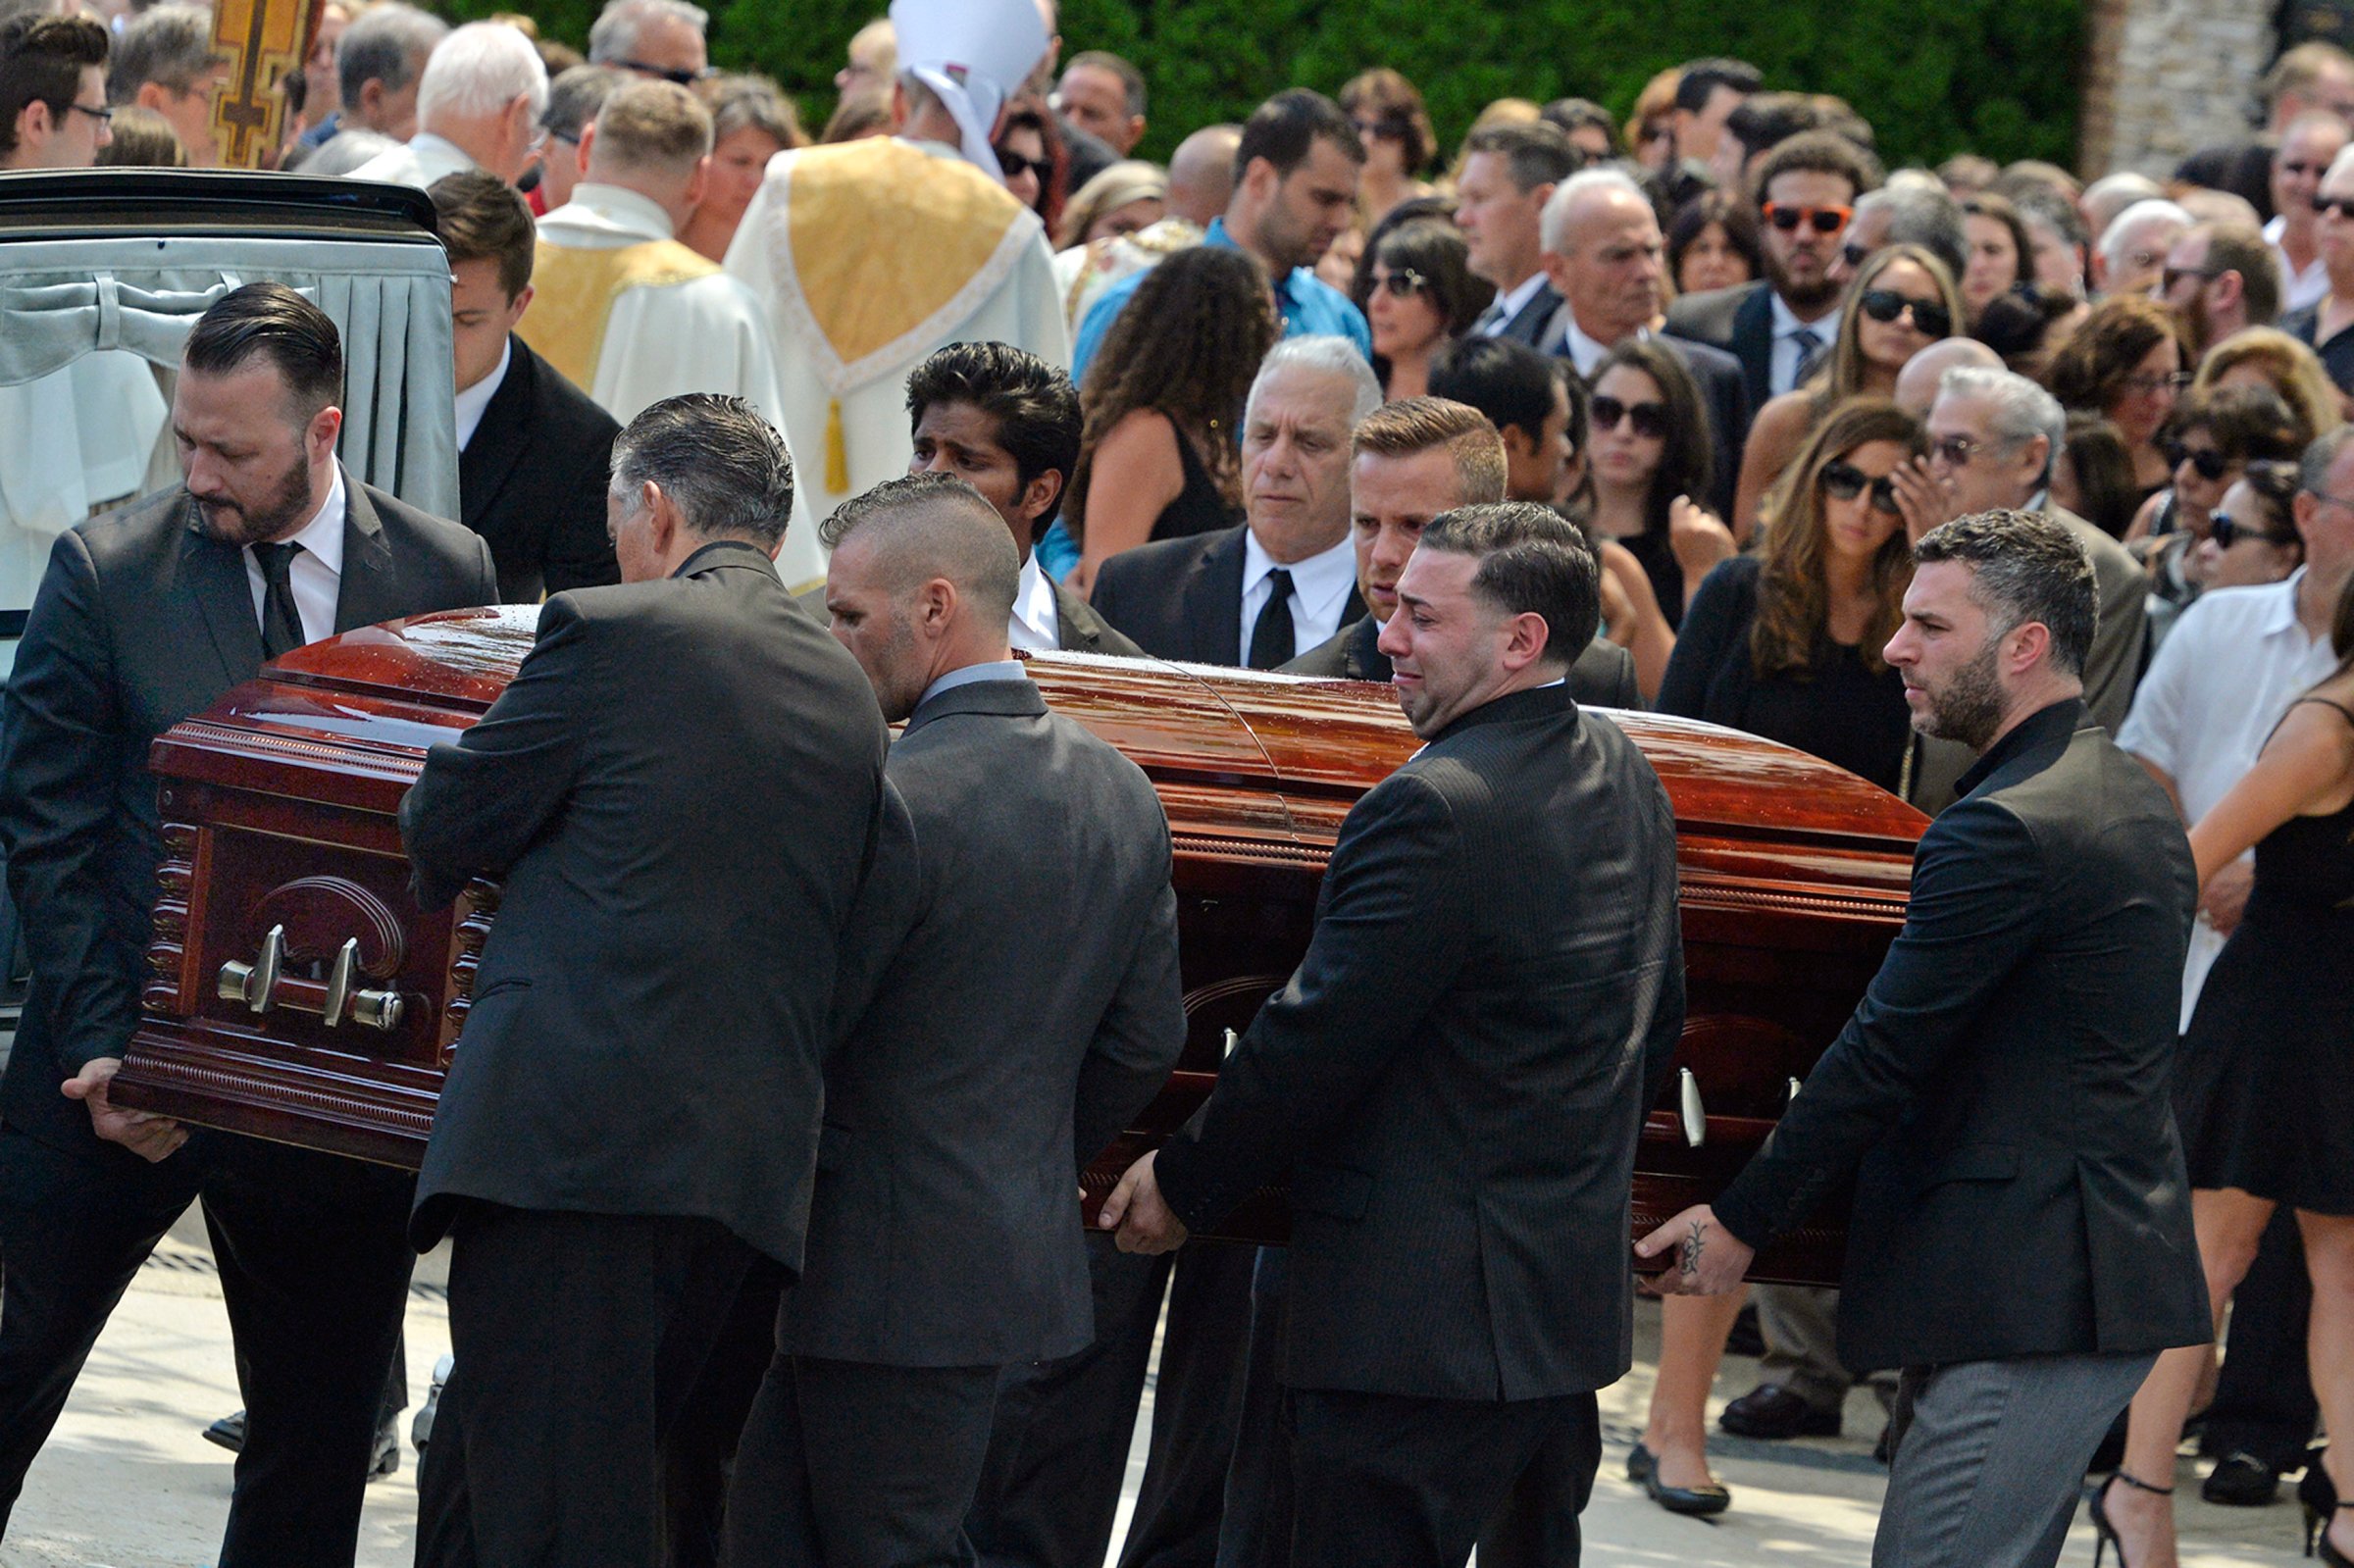 Mourners carry the casket of Karina Vetrano from St. Helen's Church following her funeral in Queens, New York on Aug. 6, 2016. Vetrano was killed while running alone during daylight hours through a Queens park the previous week.